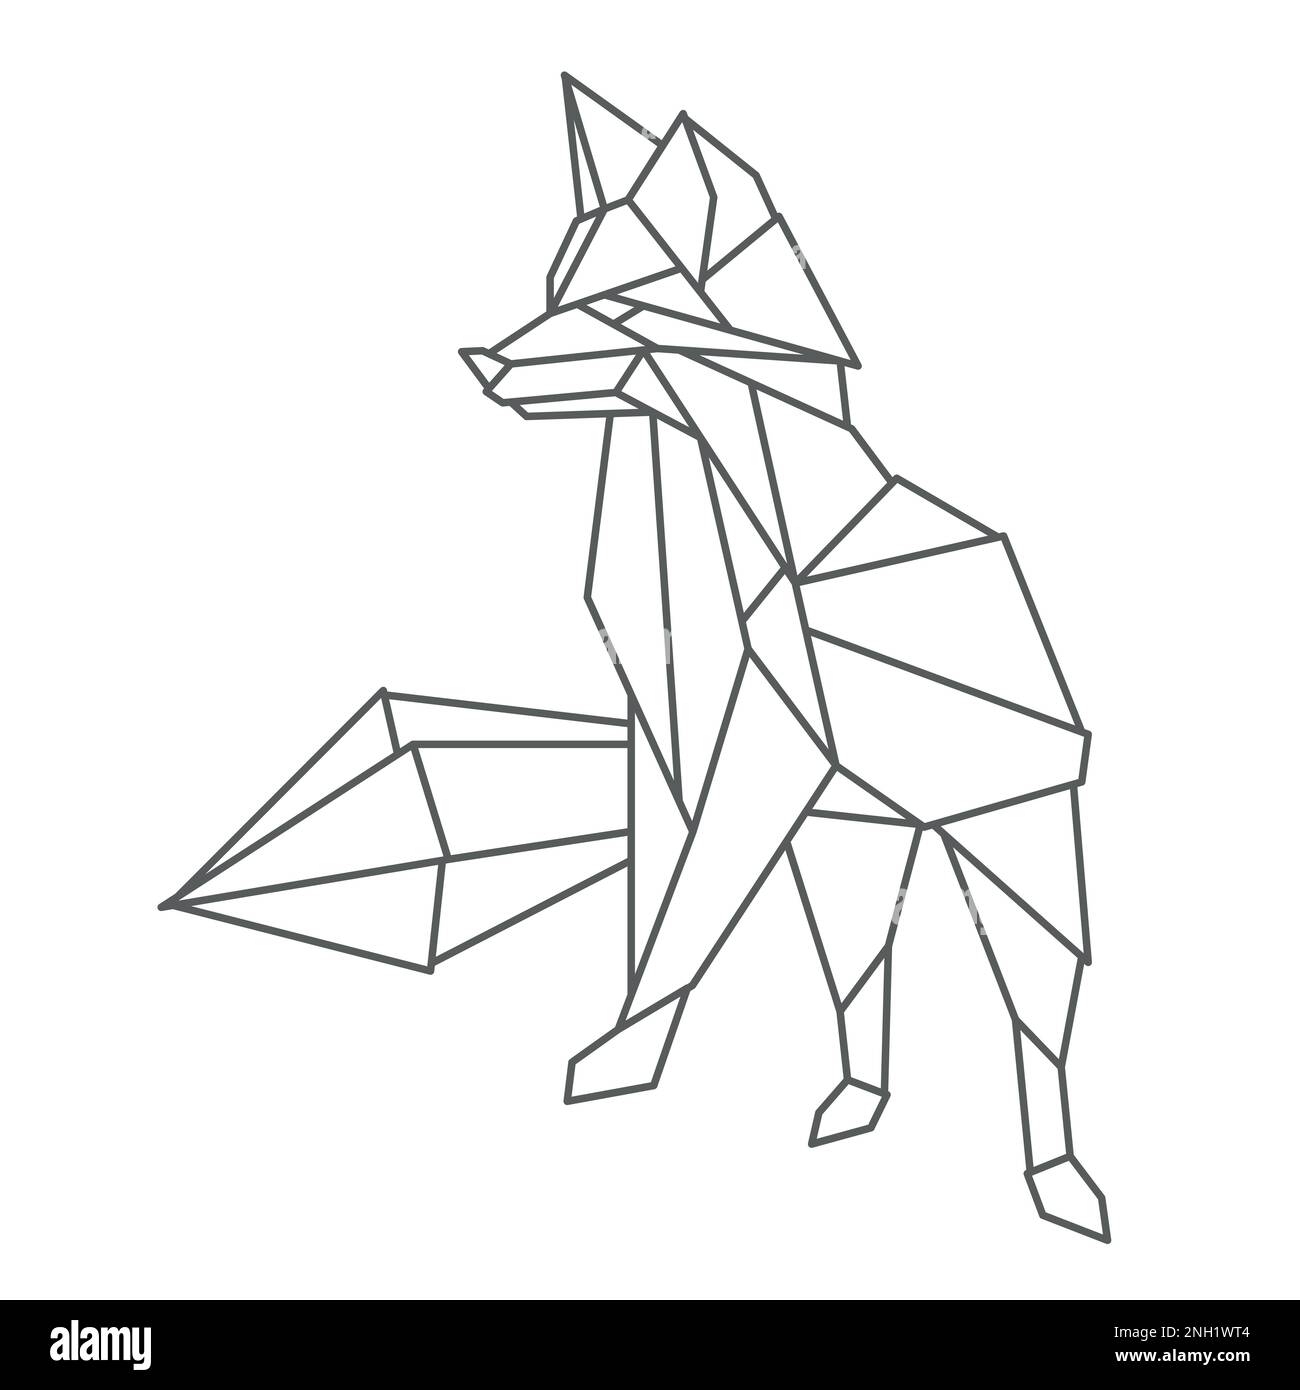 Fox poses standing. Geometric linear wild animal. Abstract minimalistic illustration. Stylish modern clipart for design of branded products. Isolated Stock Vector